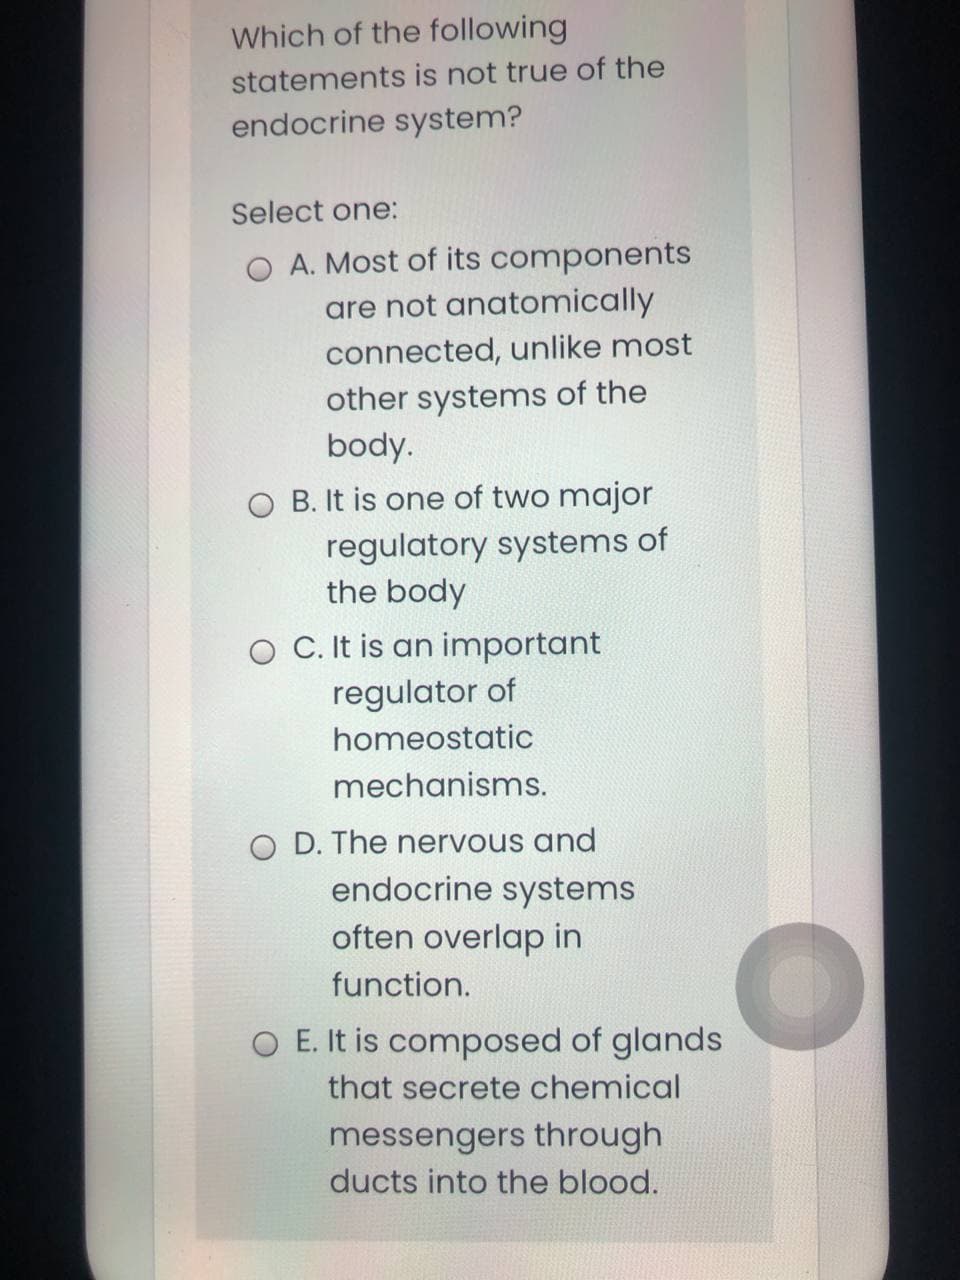 Which of the following
statements is not true of the
endocrine system?
Select one:
A. Most of its components
are not anatomically
connected, unlike most
other systems of the
body.
O B. It is one of two major
regulatory systems of
the body
O C. It is an important
regulator of
homeostatic
mechanisms.
O D. The nervous and
endocrine systems
often overlap in
function.
O E. It is composed of glands
that secrete chemical
messengers through
ducts into the blood.
